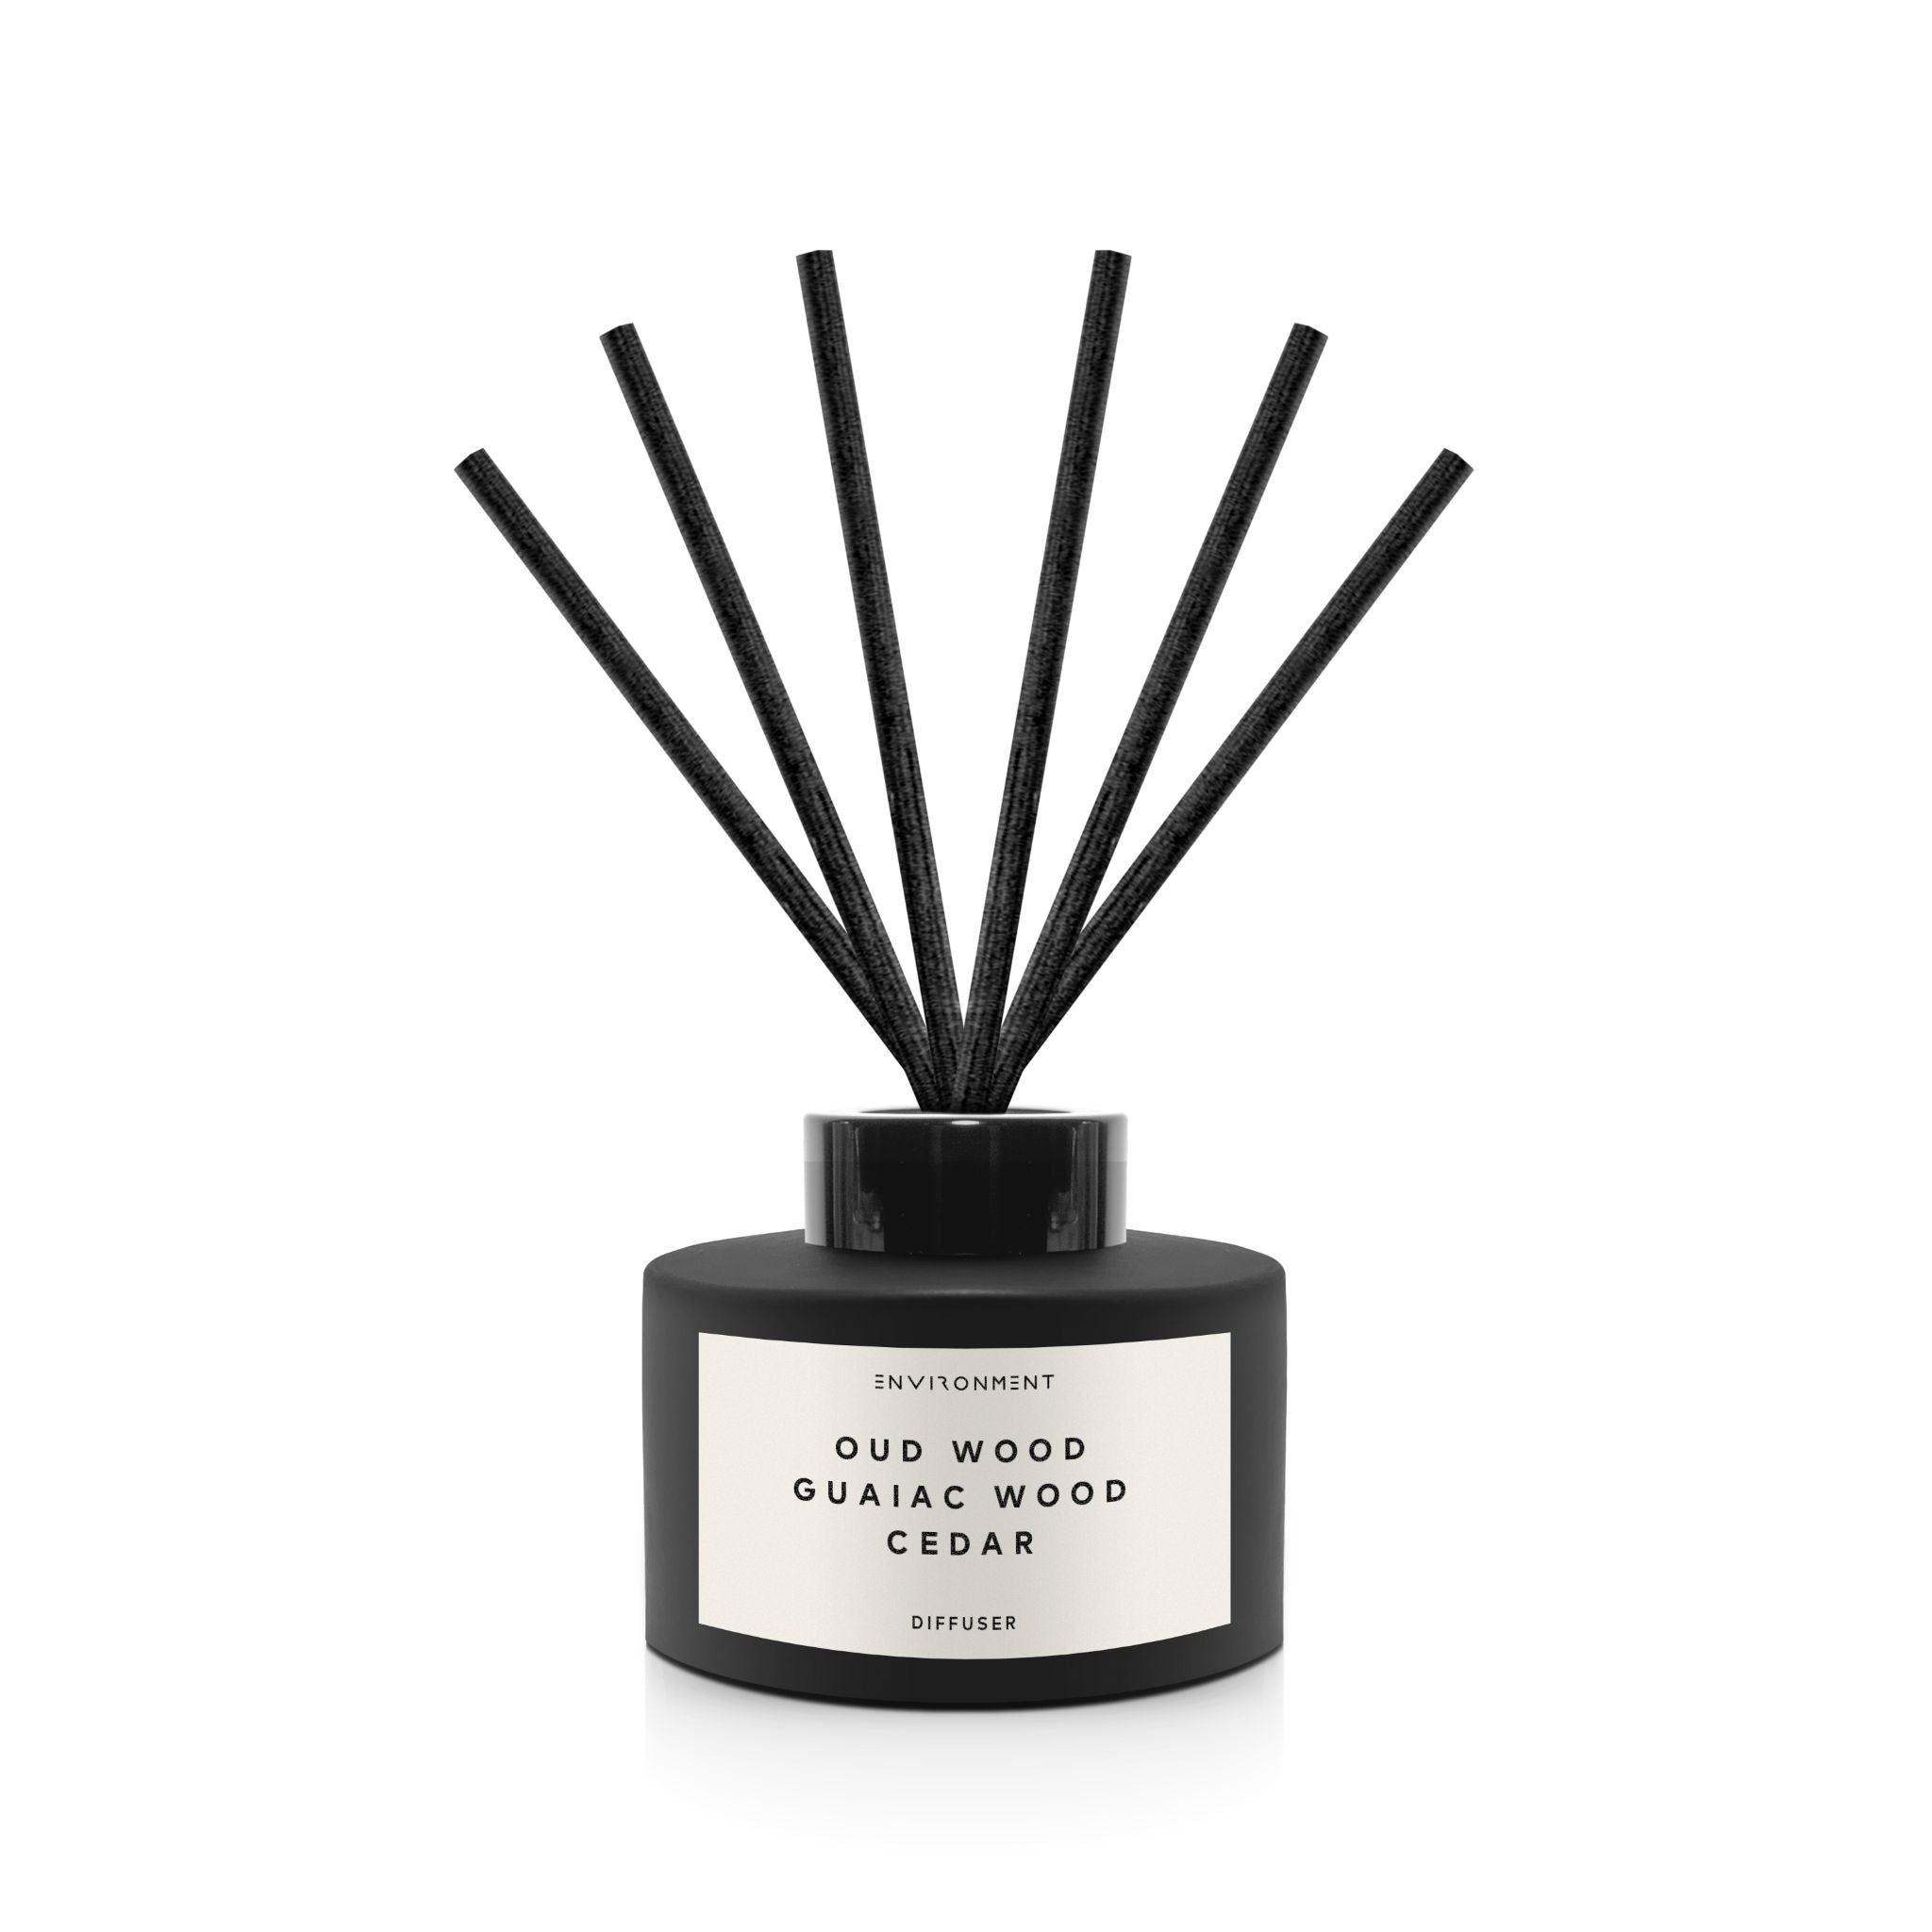 Oud Wood | Guaiac Wood | Cedar 200ml Diffuser and 8oz Candle Gift Pack (Inspired by Tom Ford Oud Wood®)